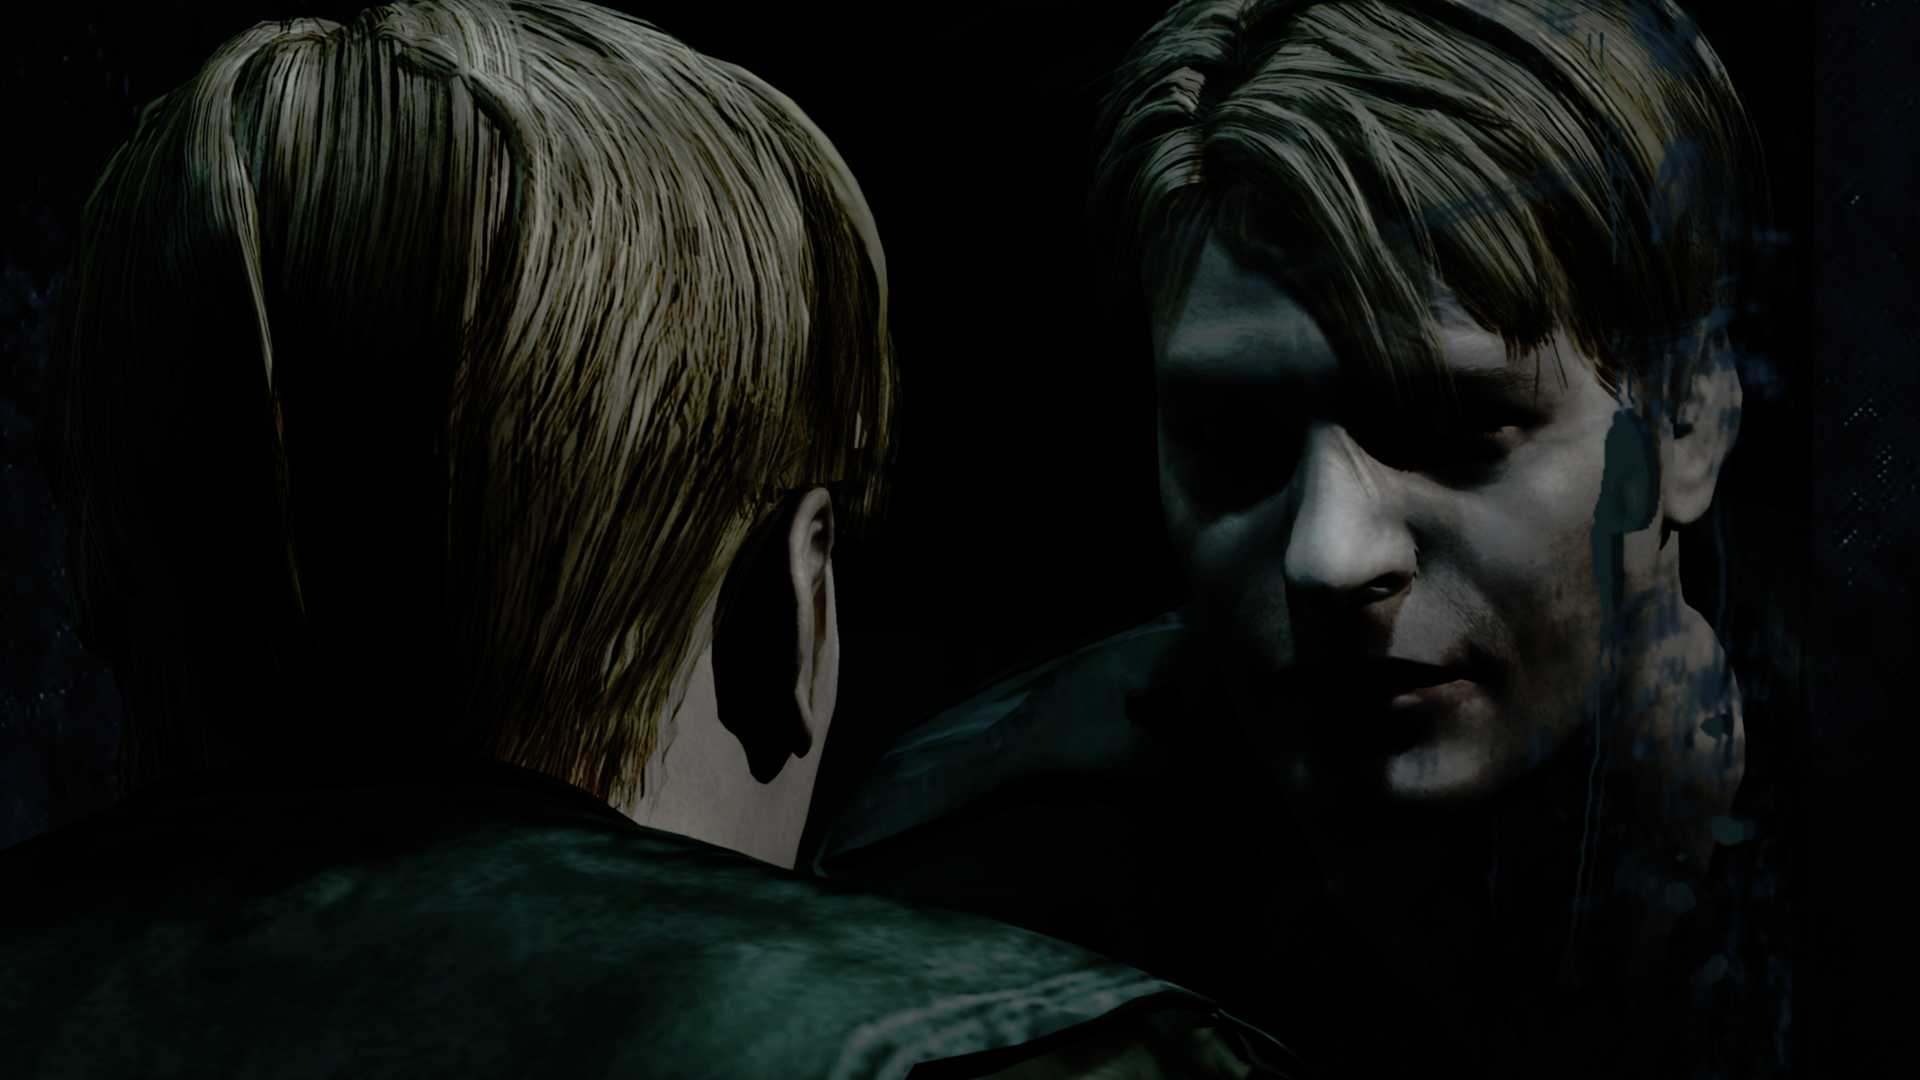 Best scary horror games - Silent Hill 2